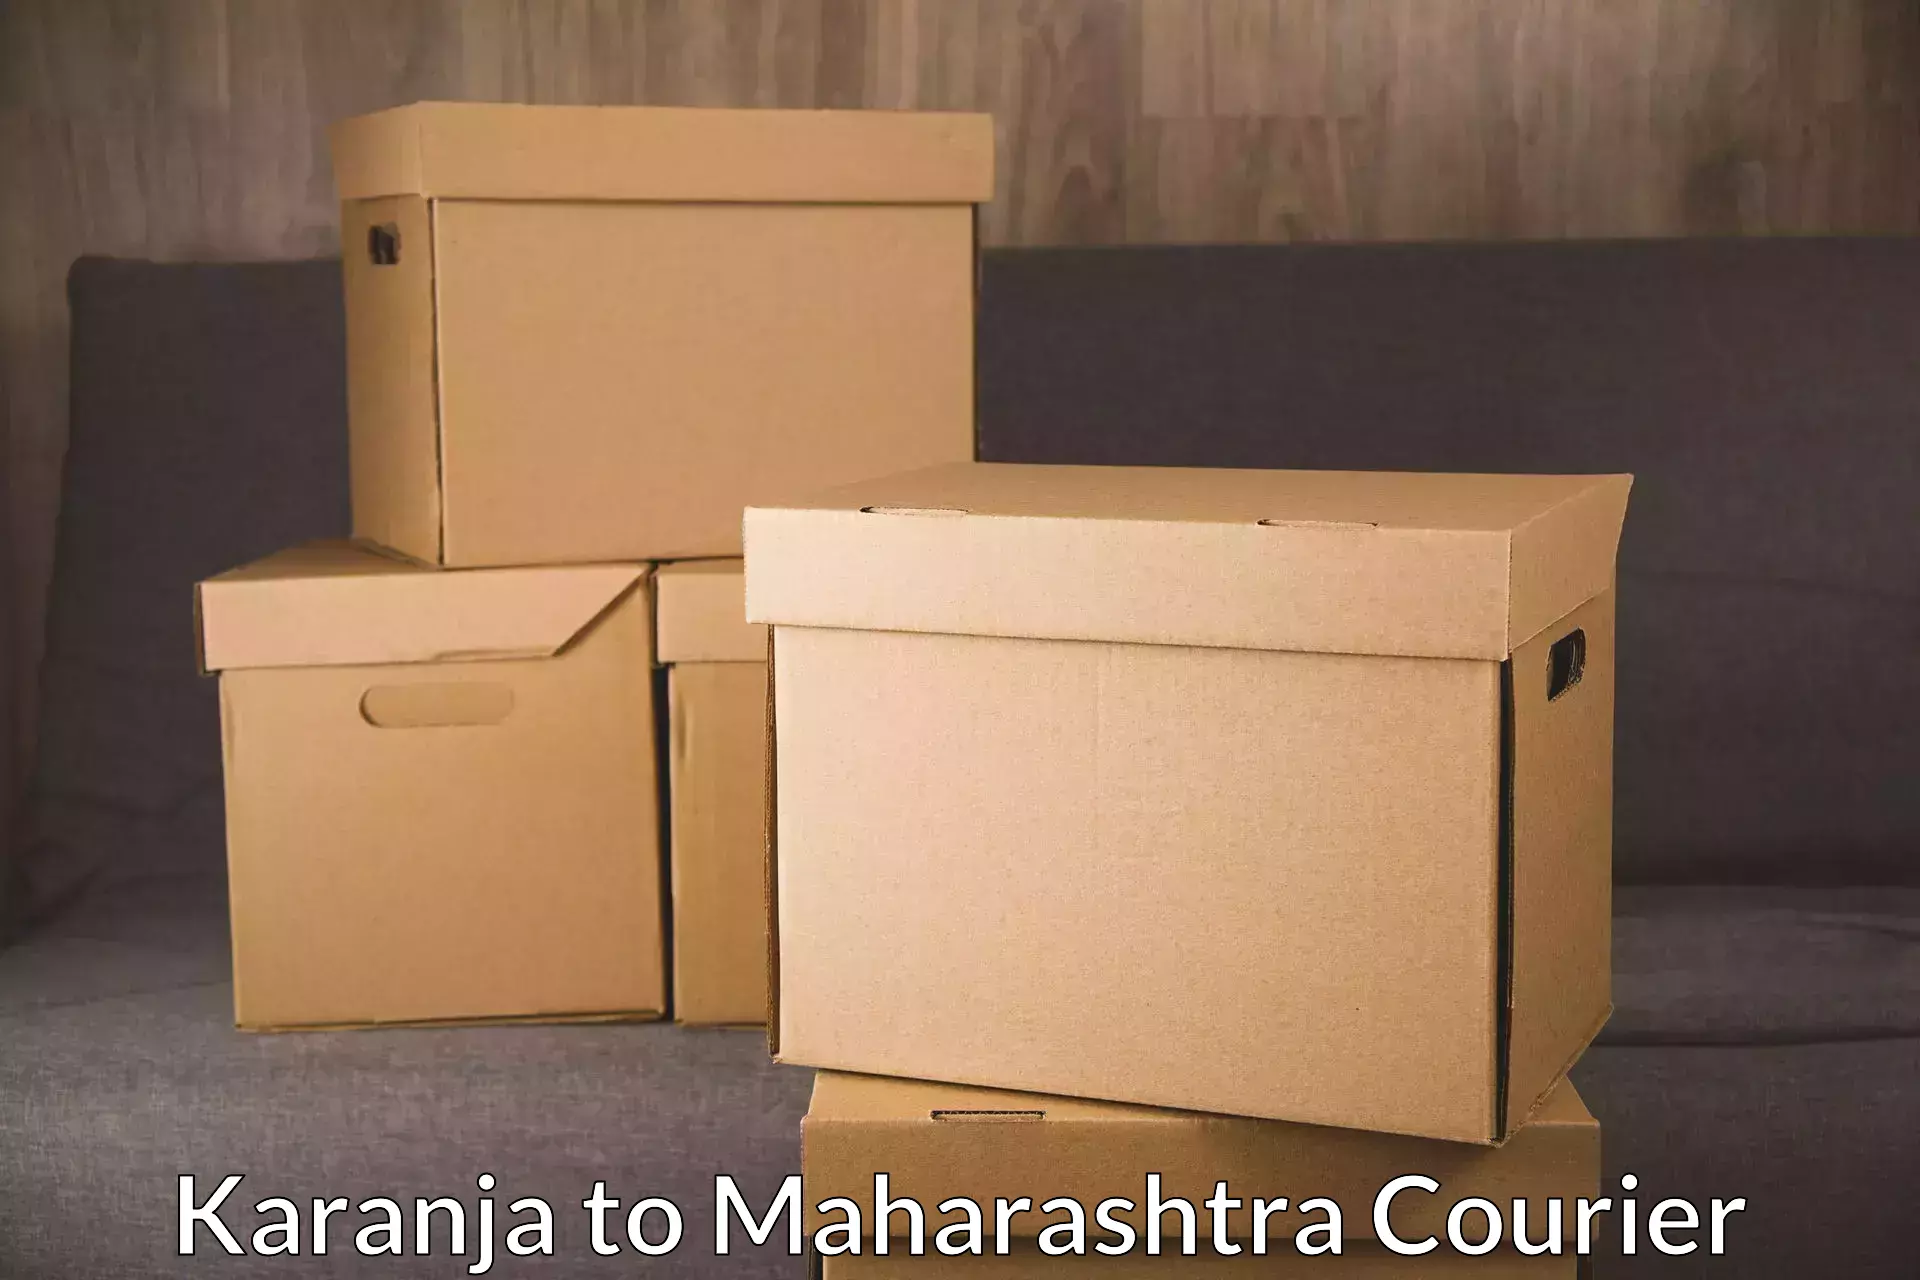 End-to-end delivery in Karanja to Maharashtra